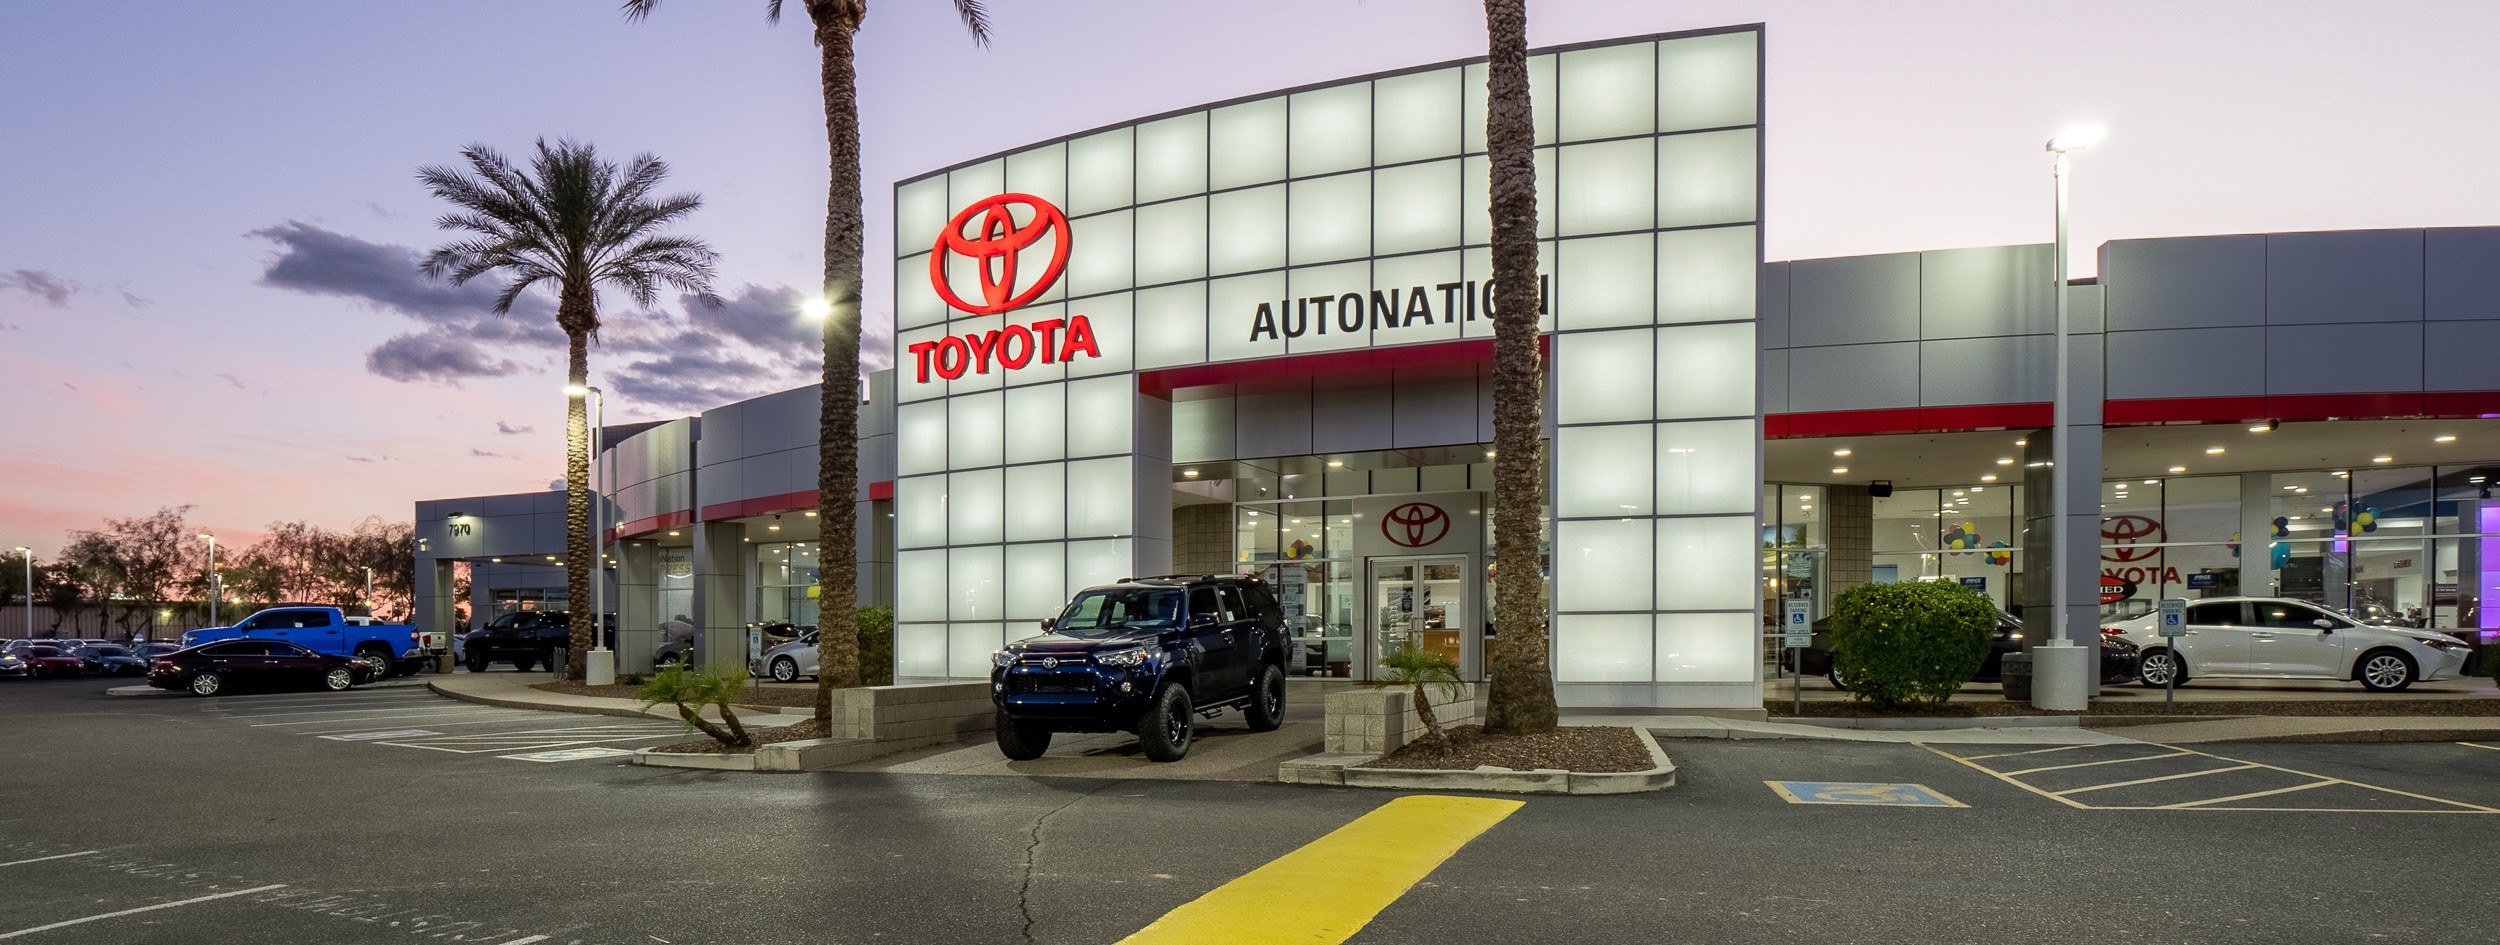 Toyota Dealer Near Me Dealership toyota near me : best of the toyota 2019 selection according